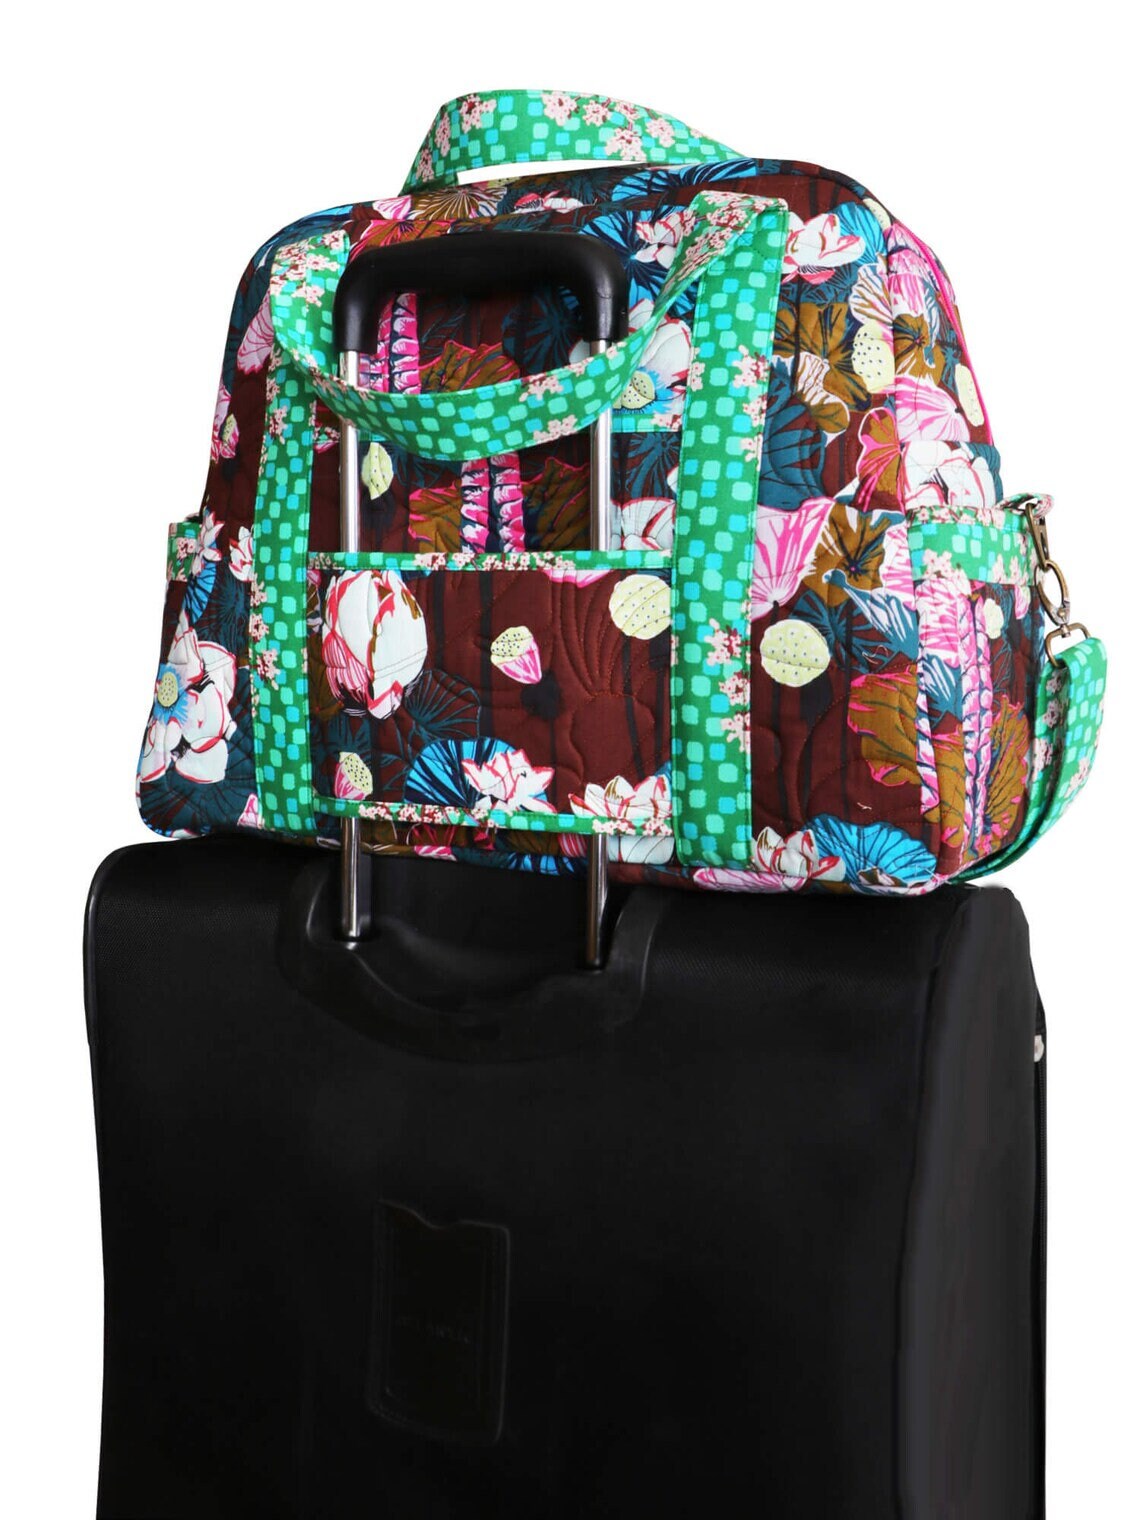 Ultimate Travel Bag 2.0 Sewing Pattern - By Annie  - Carry-on Compliant